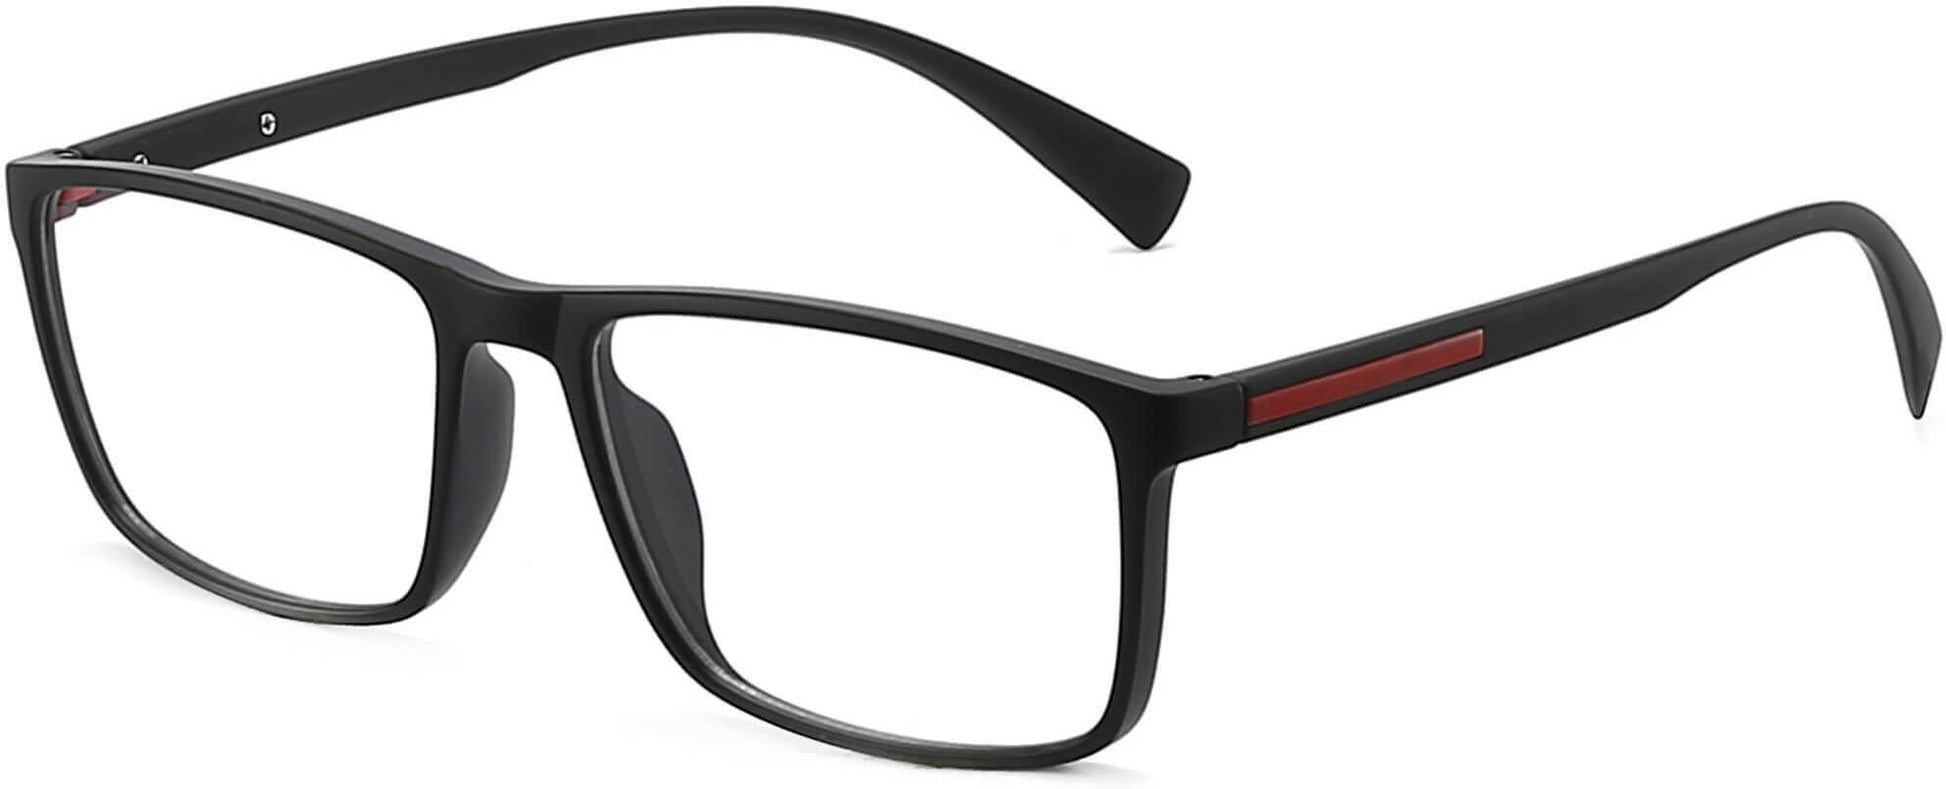 Leo Rectangle Black Eyeglasses from ANRRI, angle view